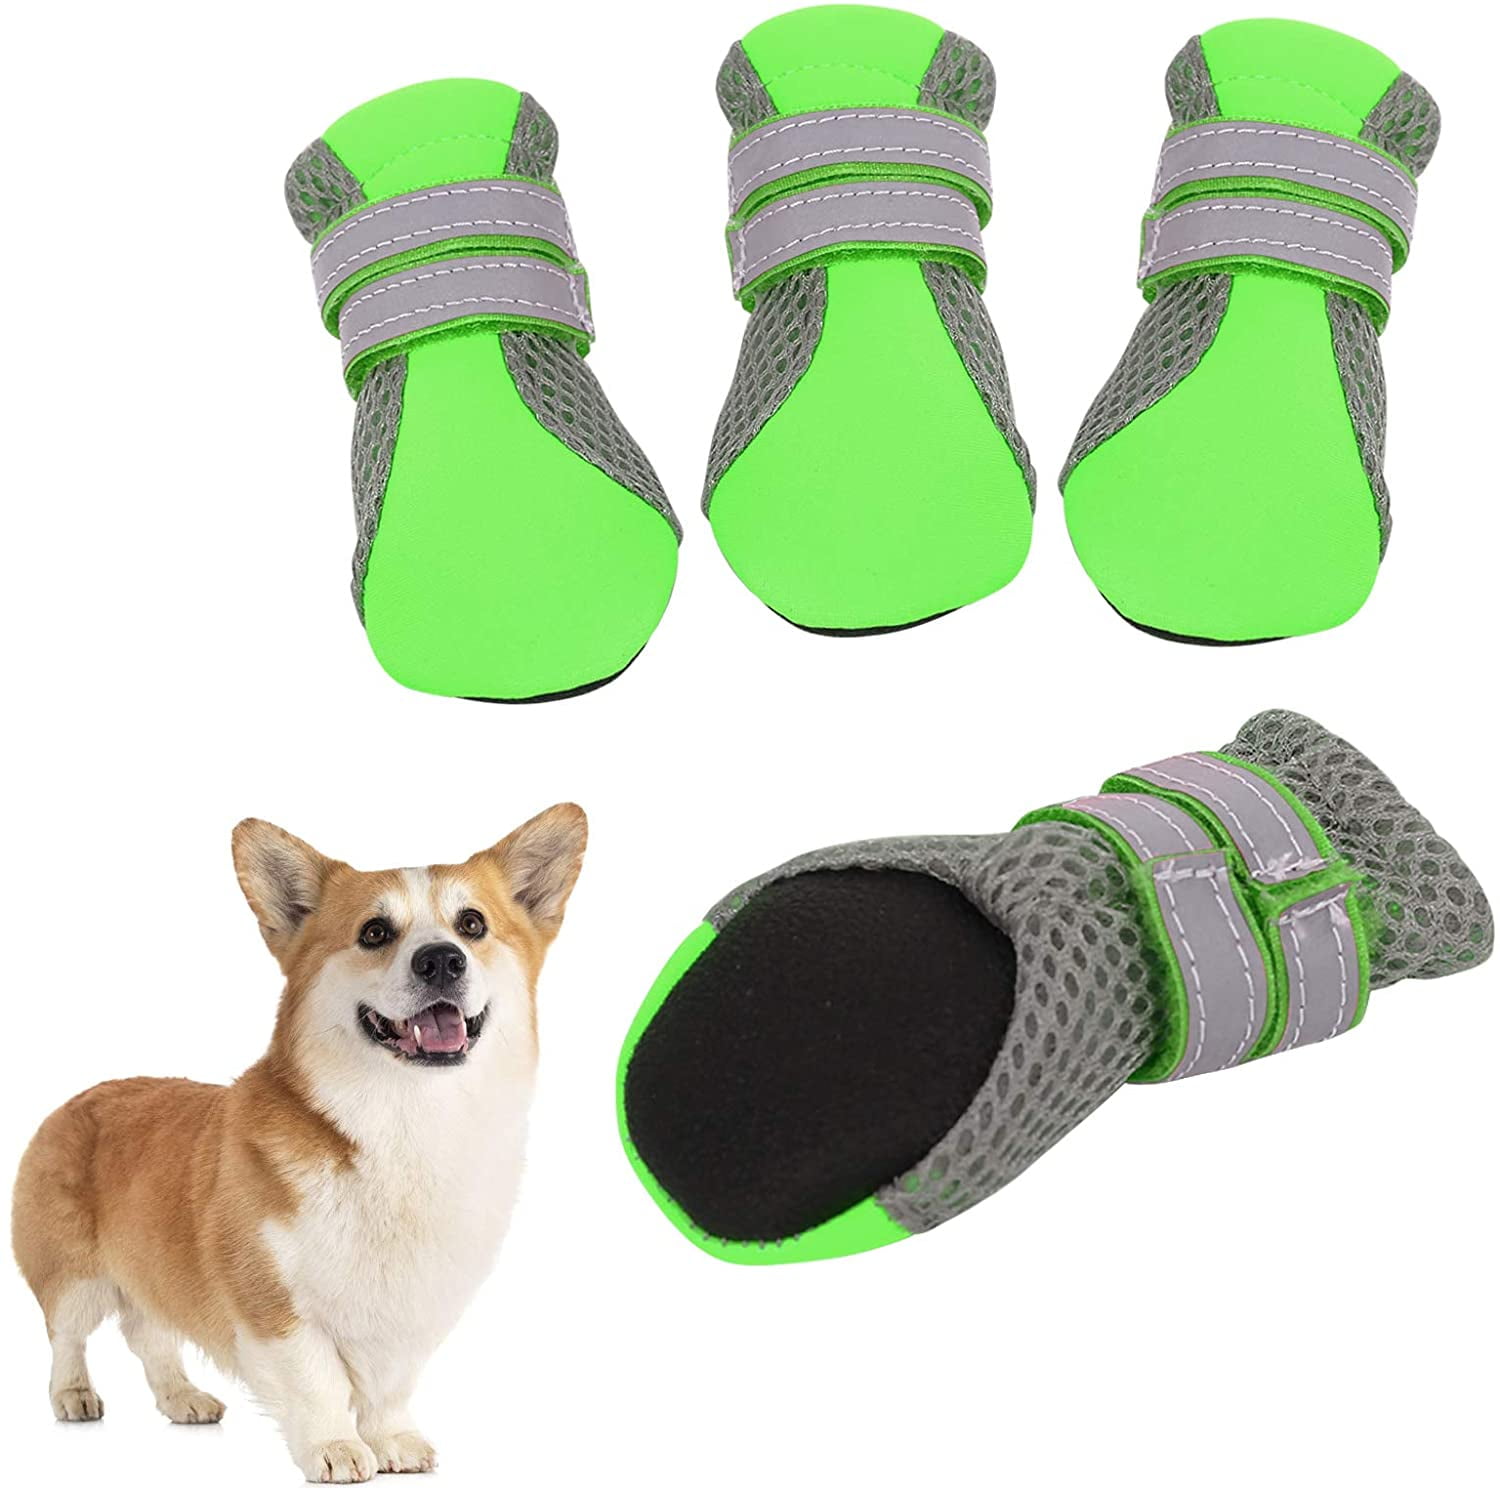 Breathable Dog Boots with Anti-Slip Rugged Sole Summer Dog Booties Dog Hiking Boots with Reflective & Adjustable Strap Zipper Closure for Small Medium Dogs Dog Shoes for Hot Pavement Hardwood Floors 